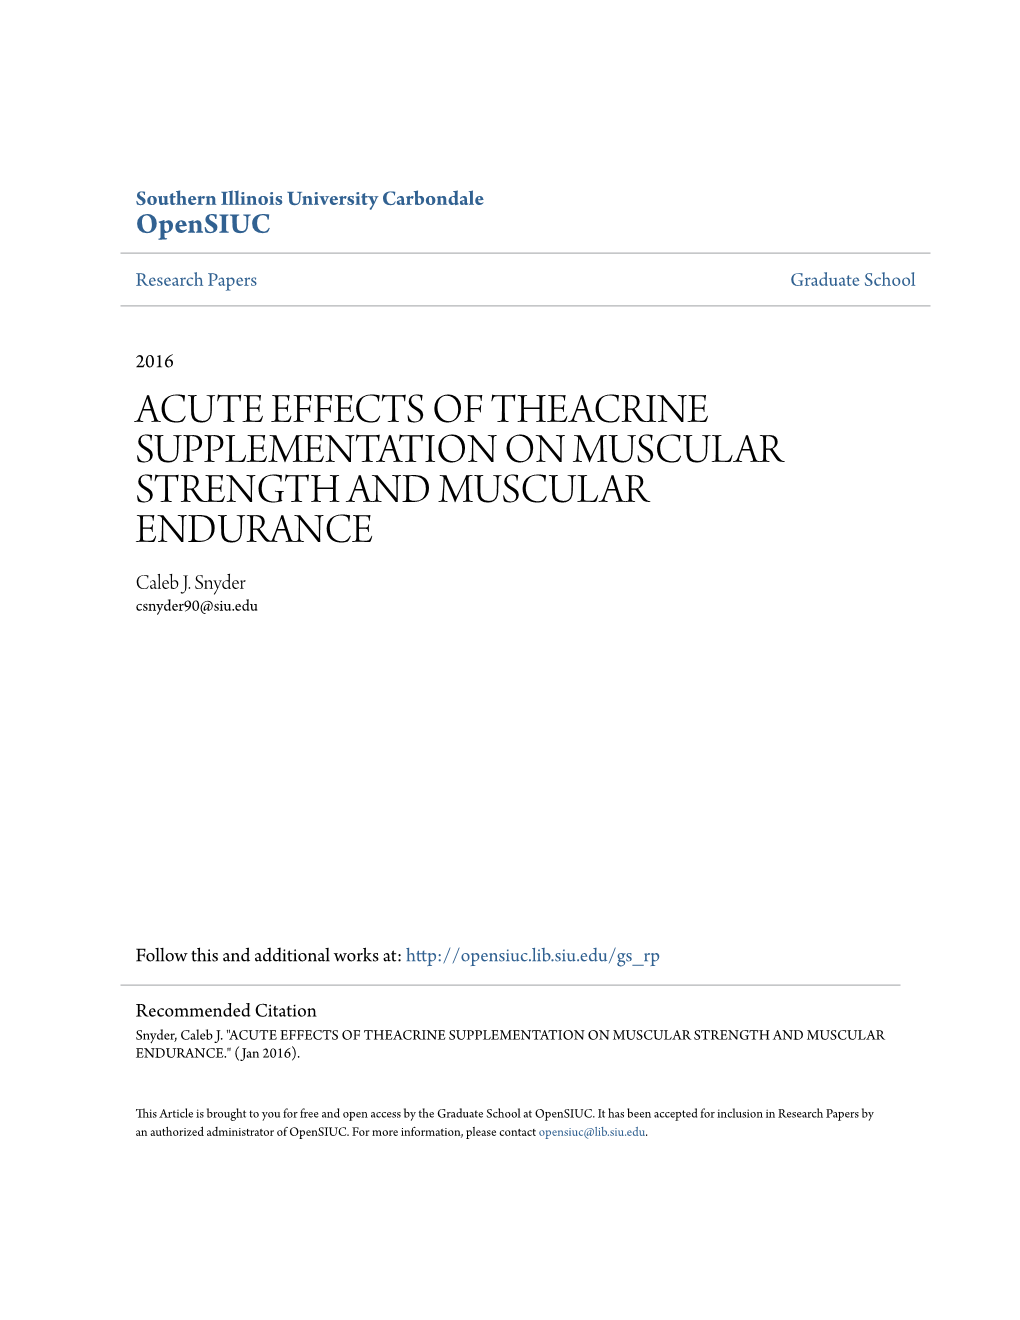 ACUTE EFFECTS of THEACRINE SUPPLEMENTATION on MUSCULAR STRENGTH and MUSCULAR ENDURANCE Caleb J